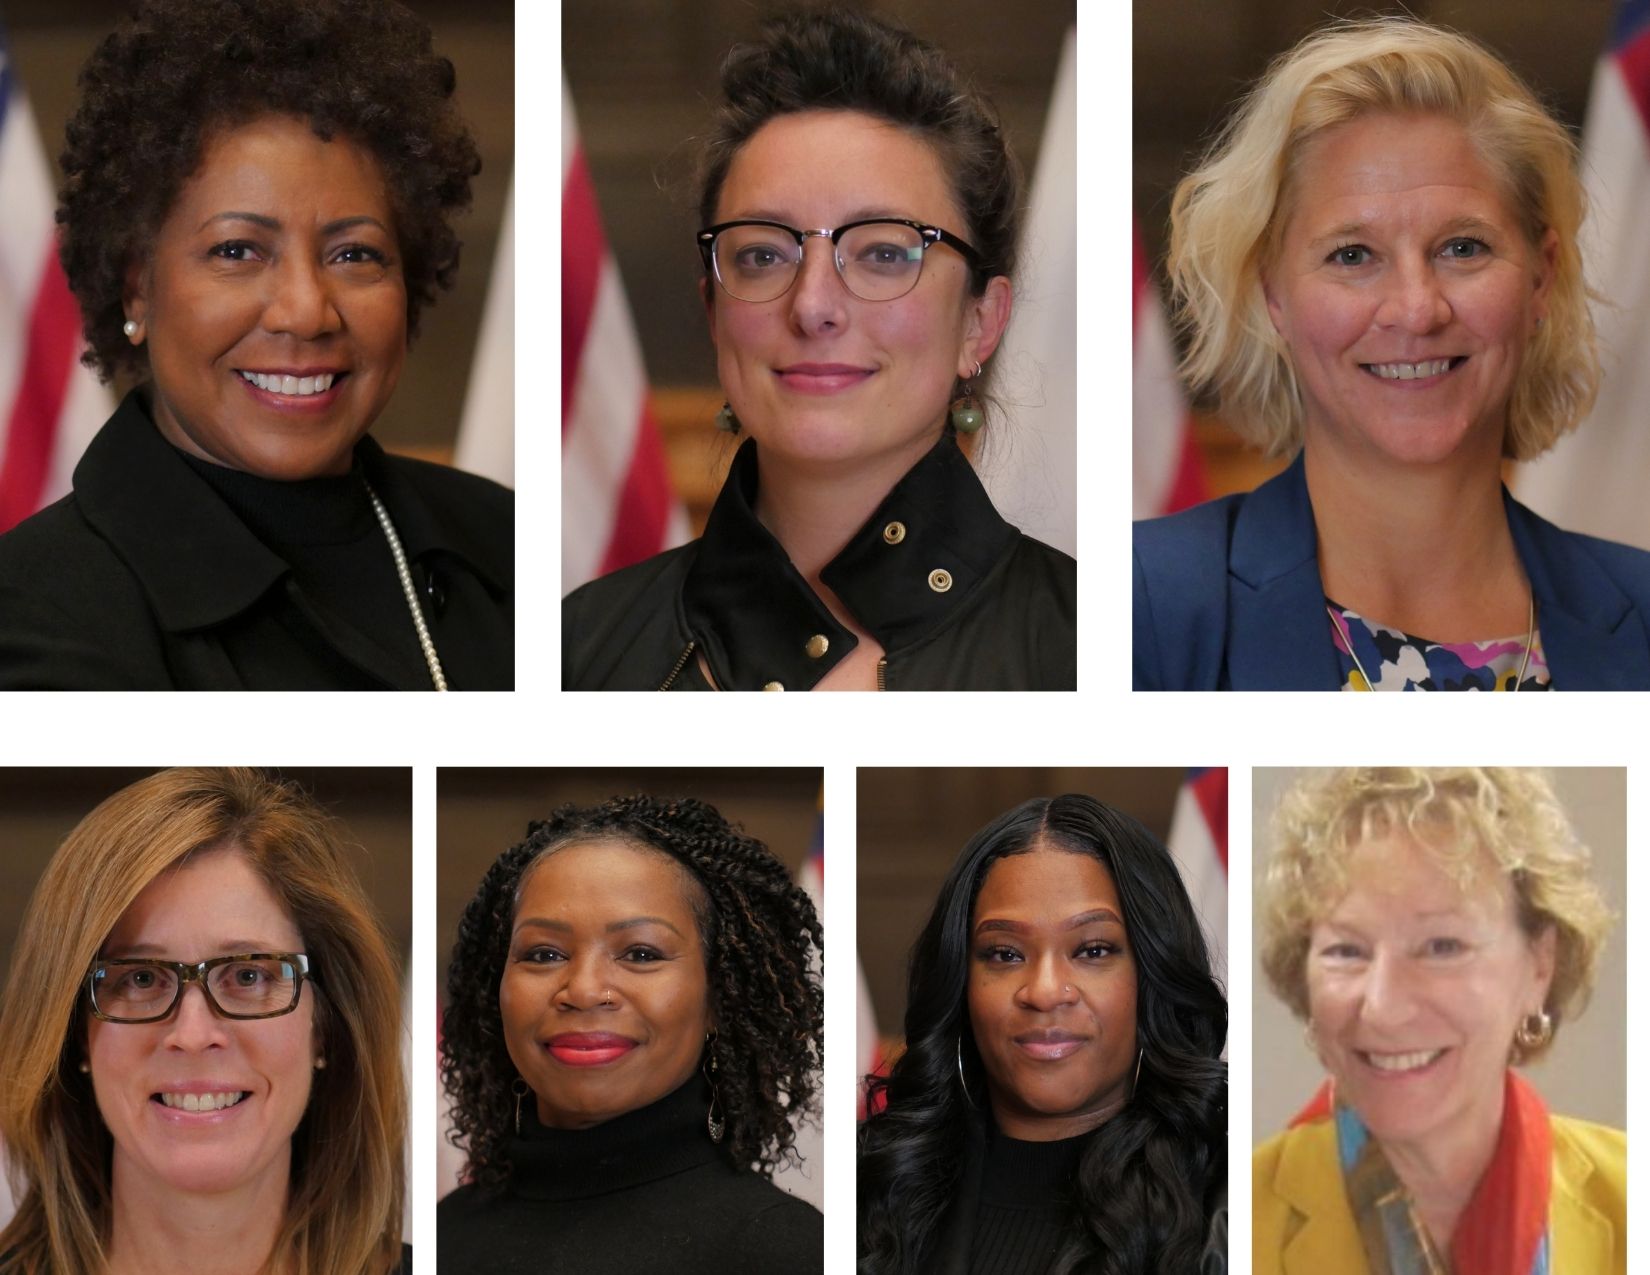 All-female city council makes history in Minnesota